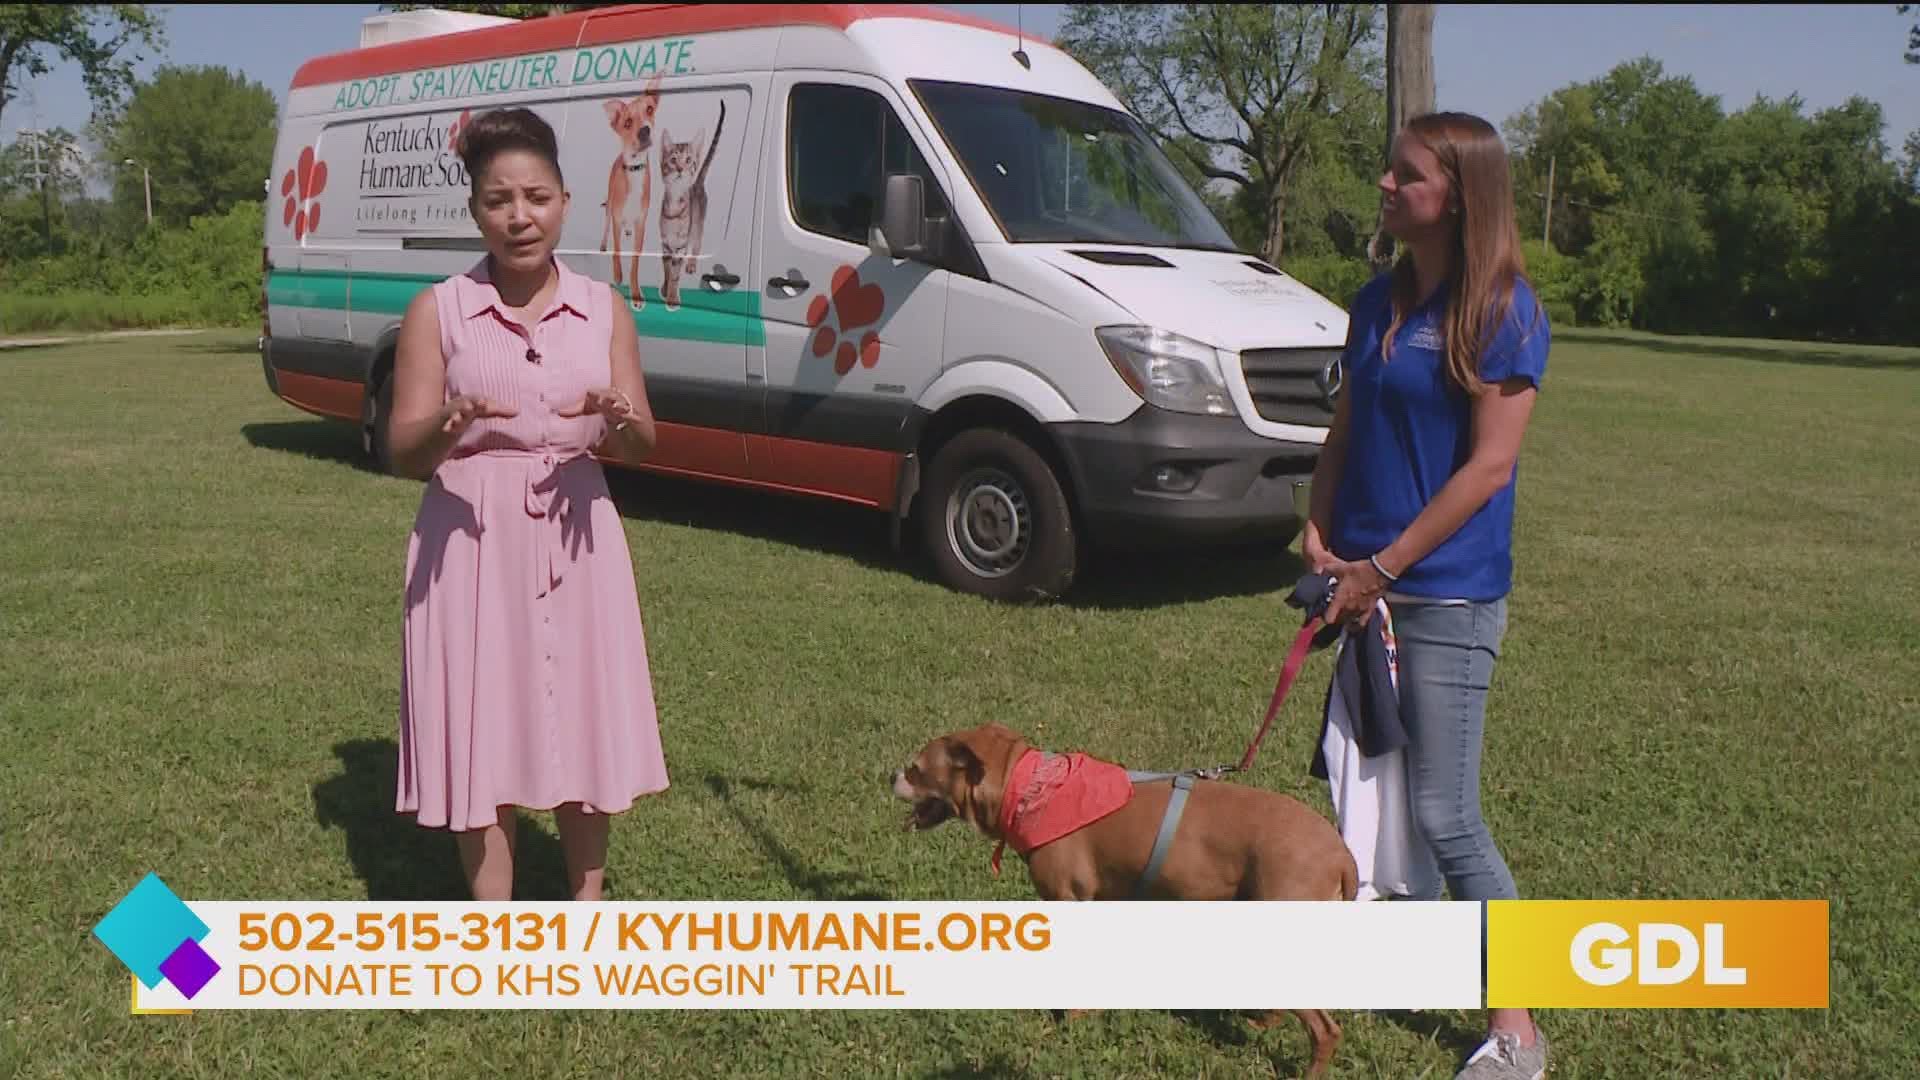 For more information on the Kentucky Humane Society's Waggin' Trail, go to KYHumane.org.